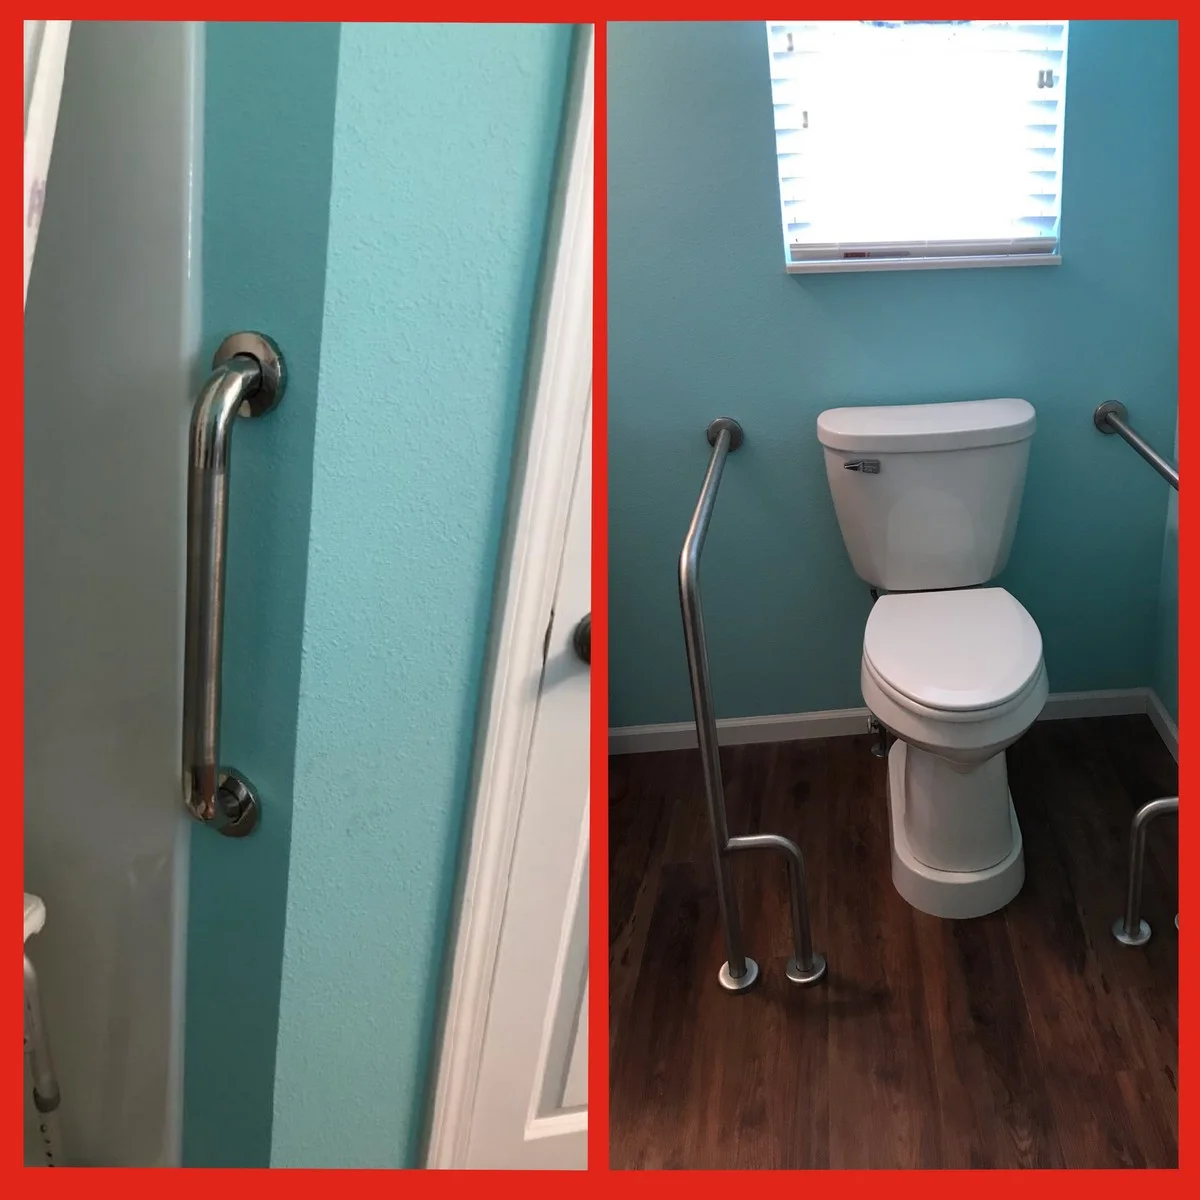 A Glen Carbon bathroom remodeled to add accessibility features